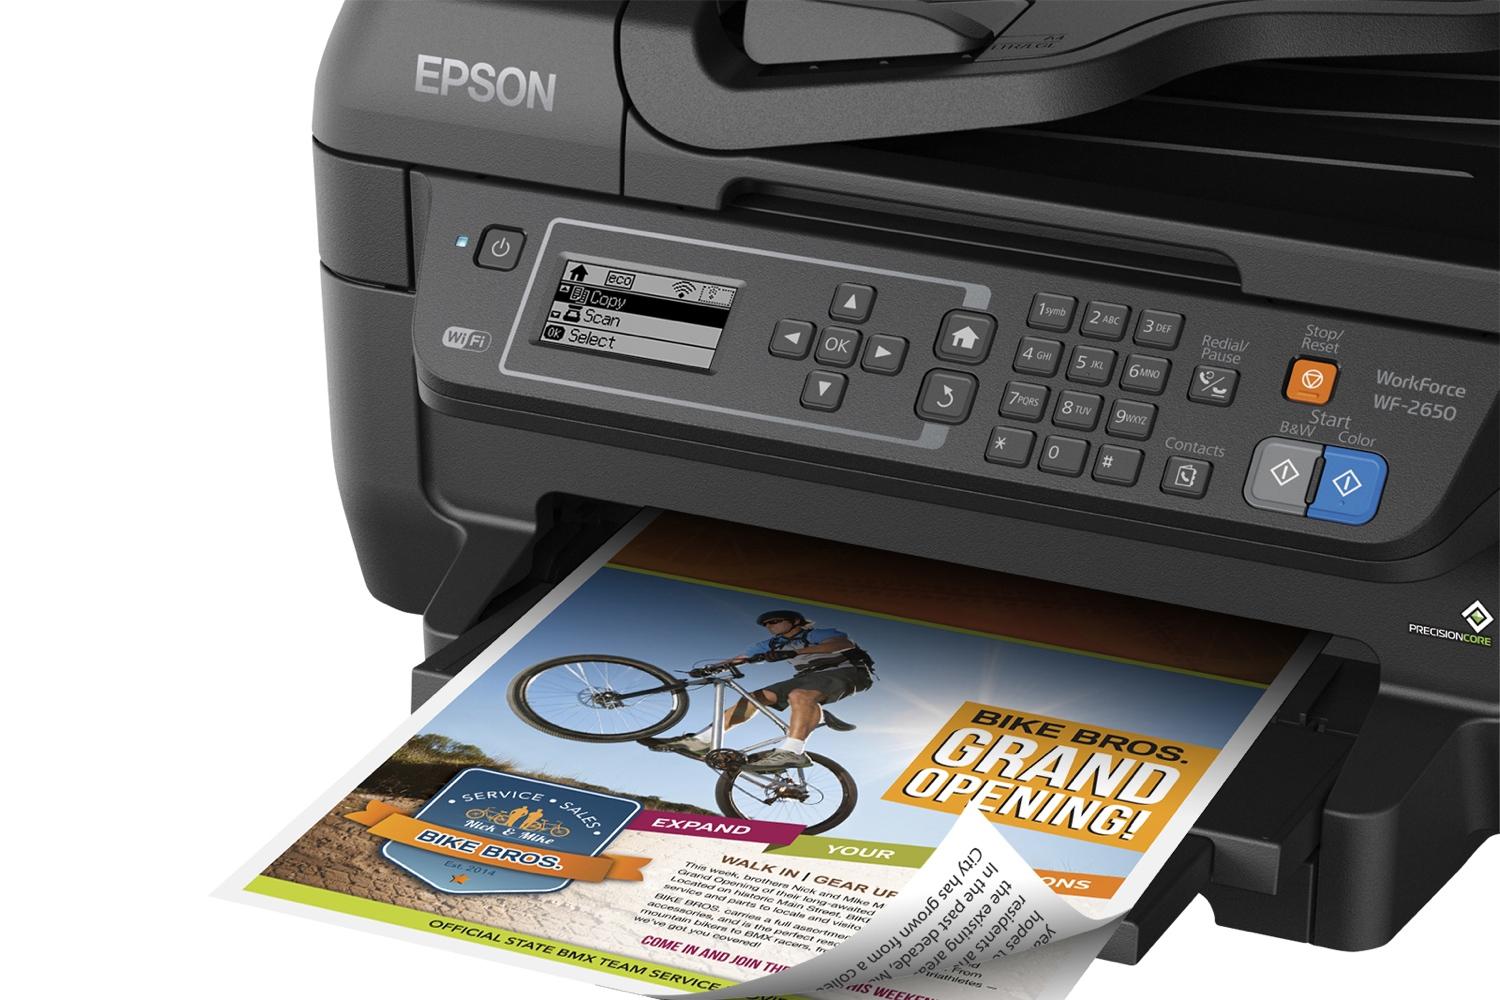 epson lowers price precisioncore inkjet tech new multifunction units workforce wf 2650 close up